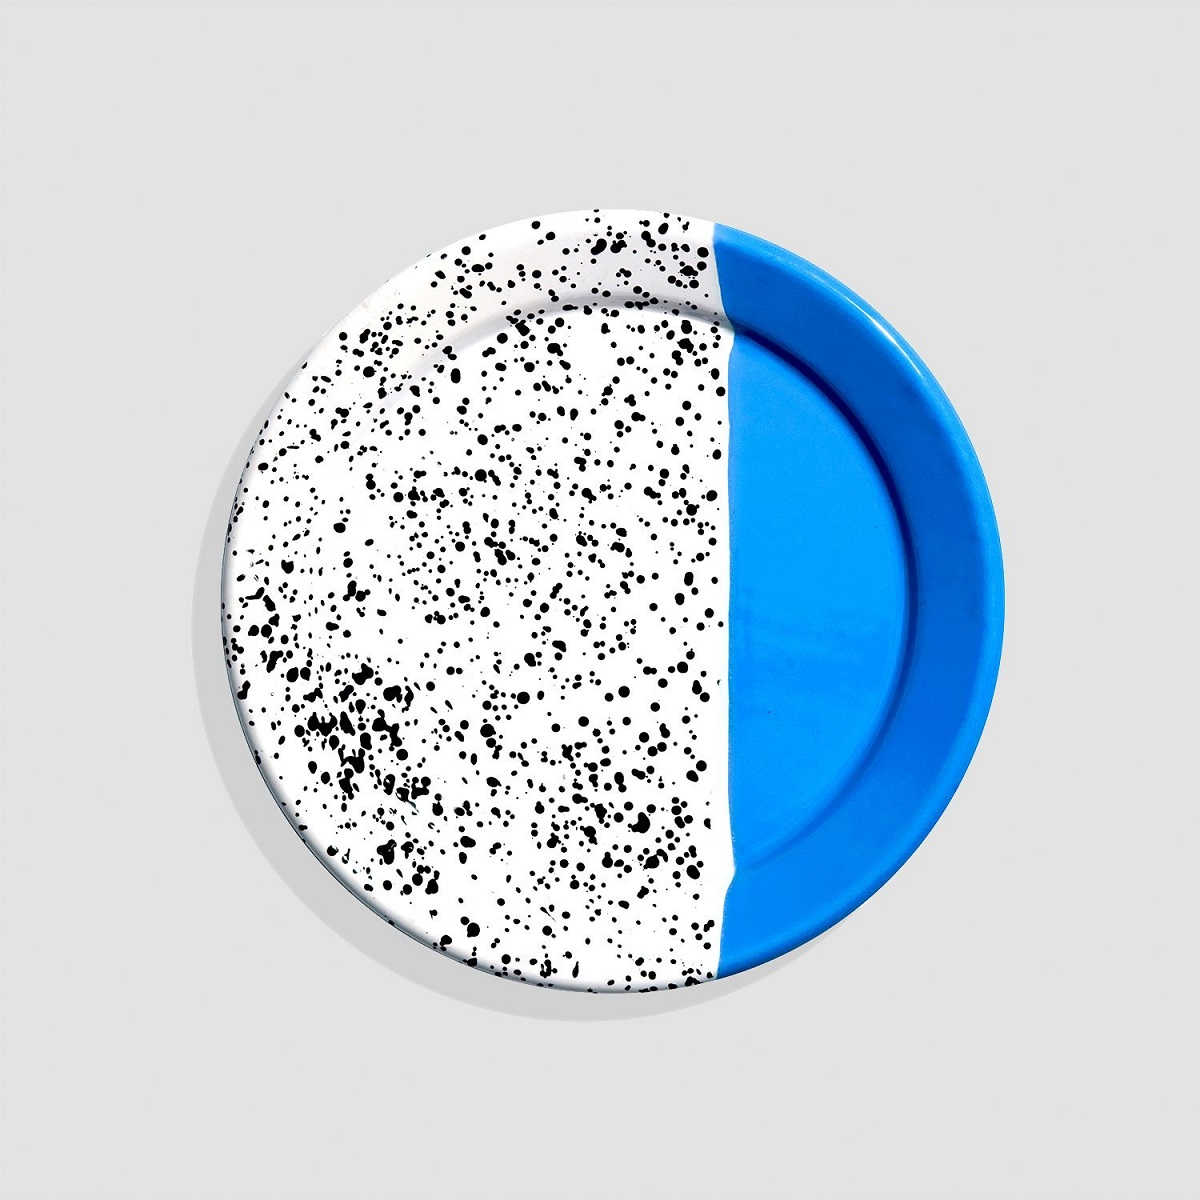 picture of a plate with vibrant colors, one half bright blue and the other half white with black speckles